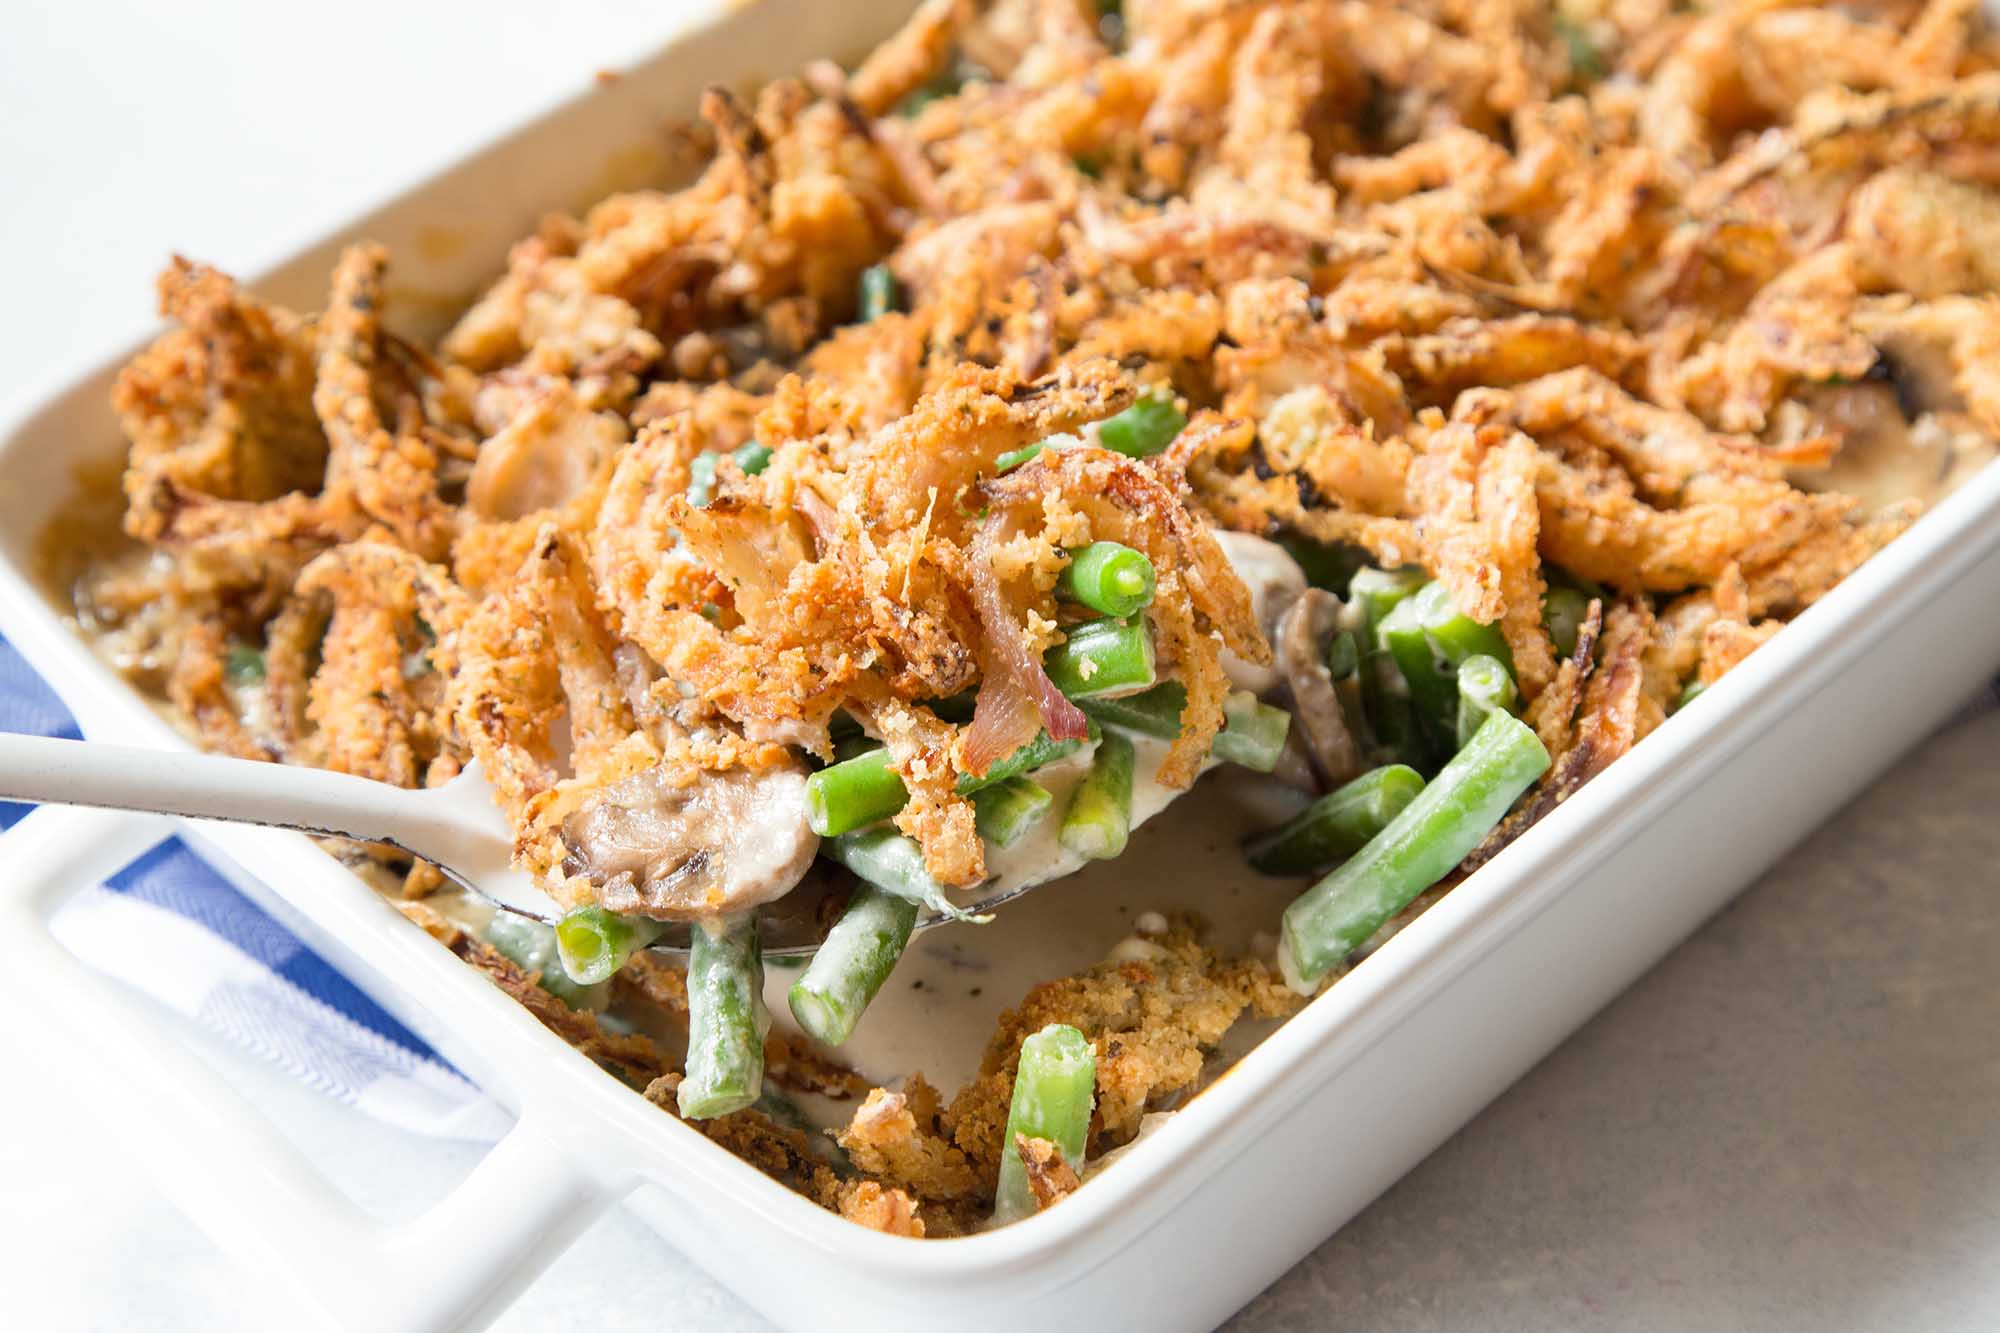 🍝 Say “Yay” Or “Nay” to These Comfort Foods, And We’ll Reveal What Type of Soul You Have Green bean casserole